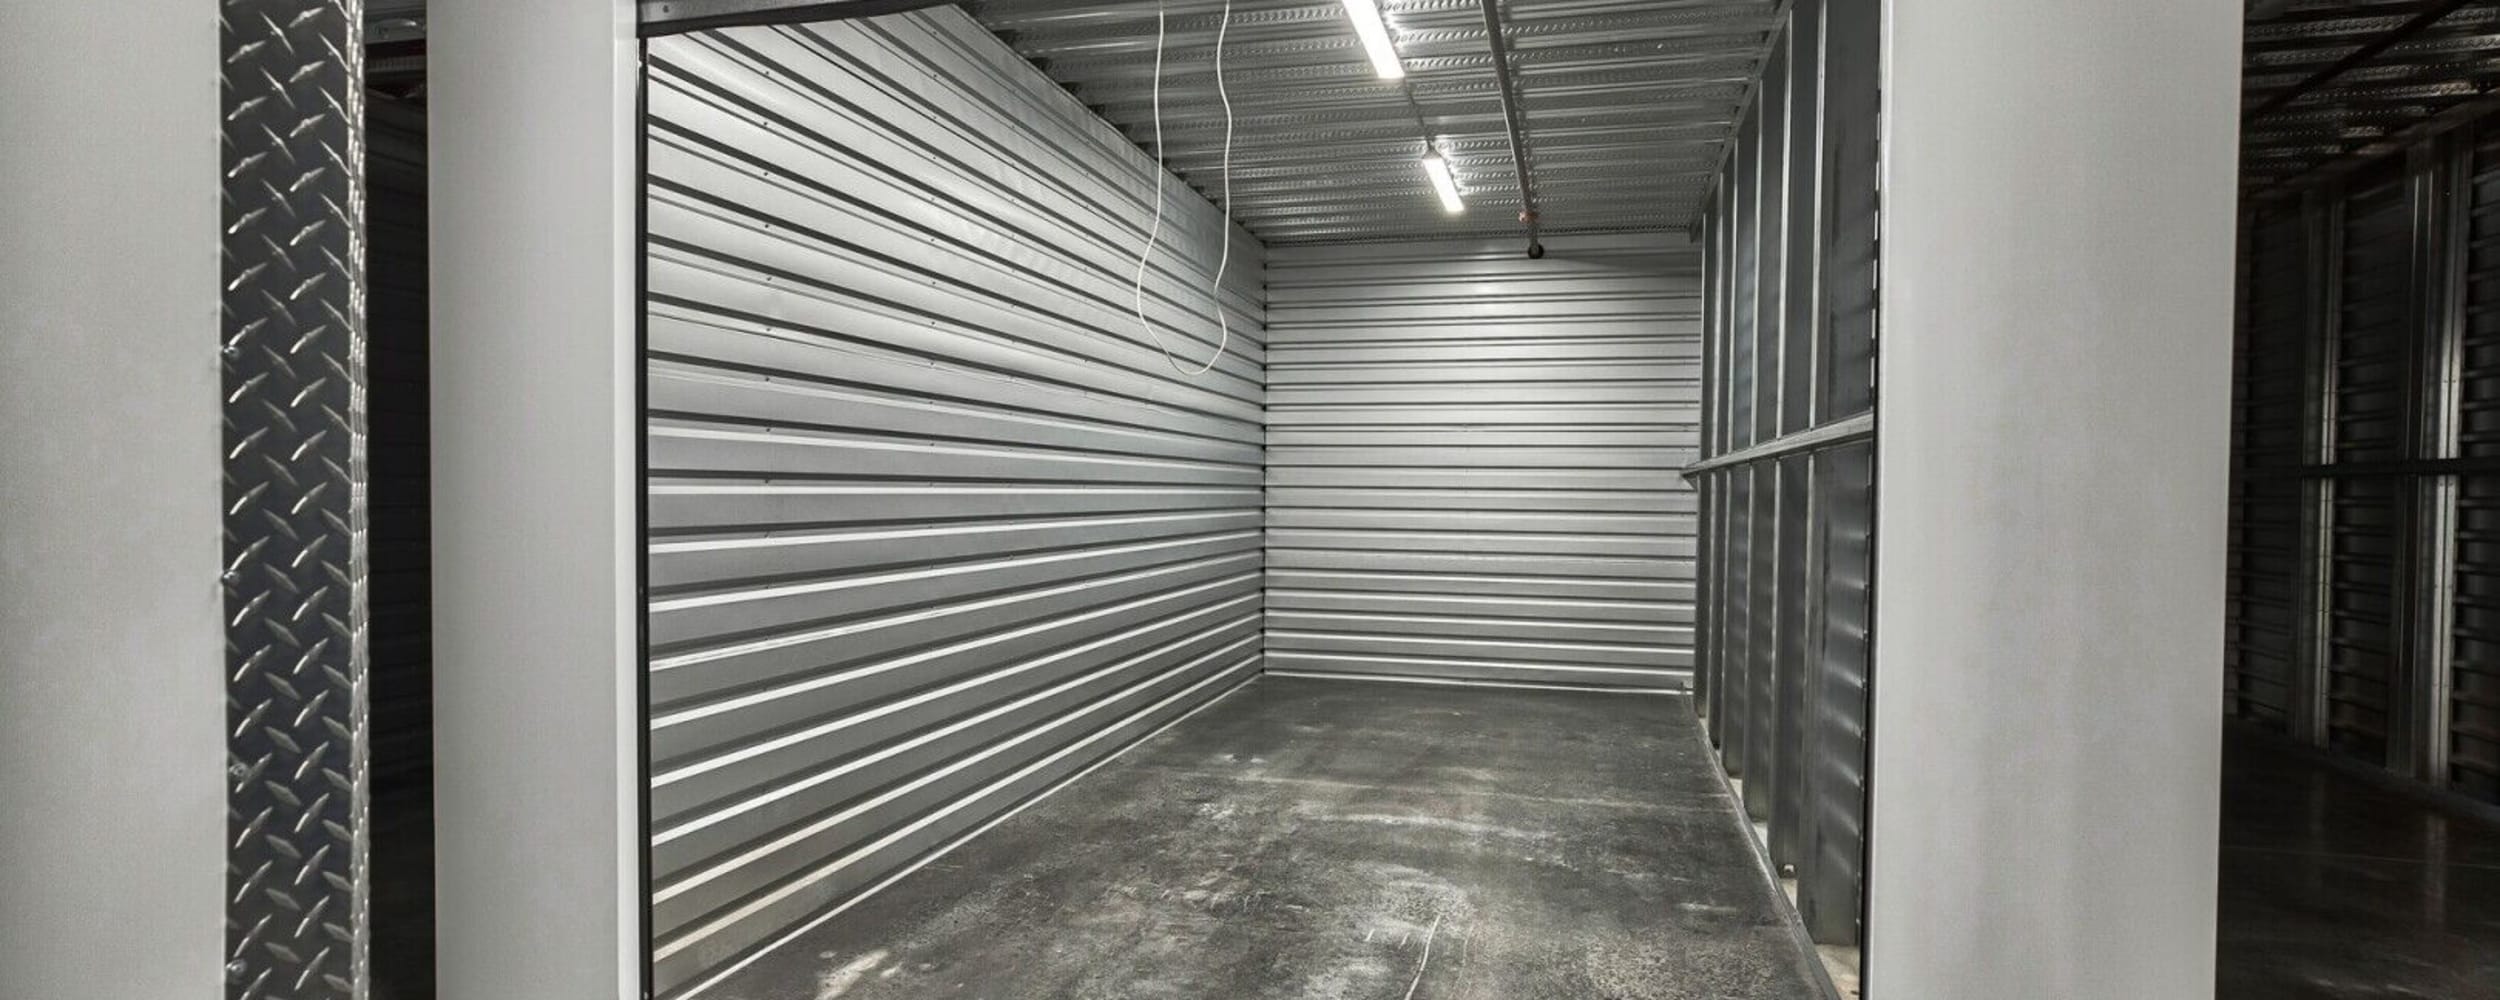 Close look at the storage unit at Advanced Heated Self Storage Bellingham in Bellingham, Washington